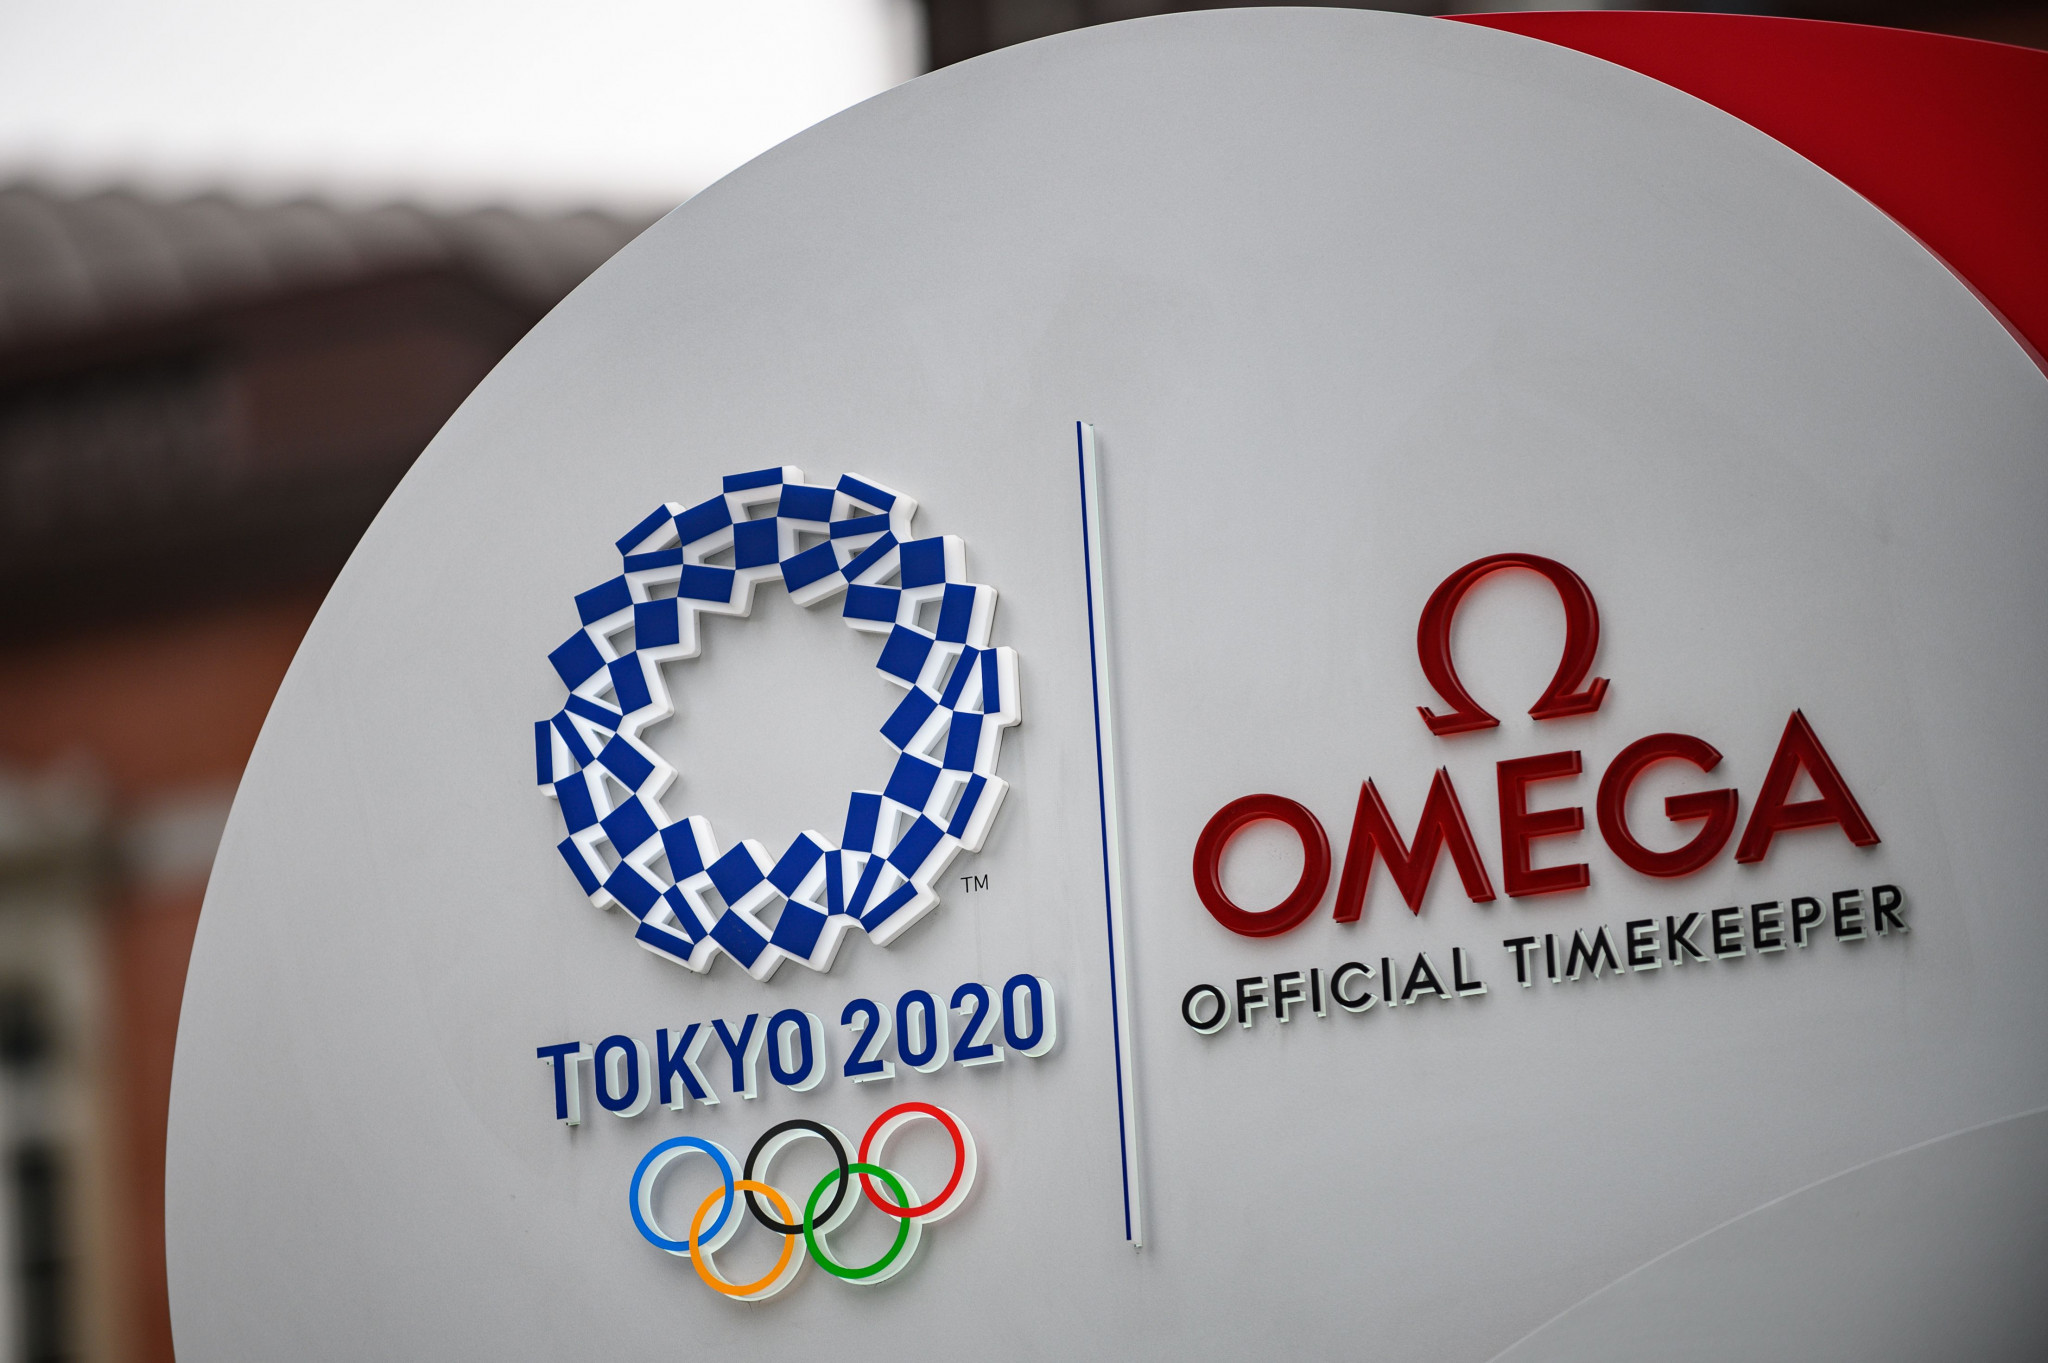 Rescheduled Tokyo 2020 Olympics To Open On July 23 In 2021